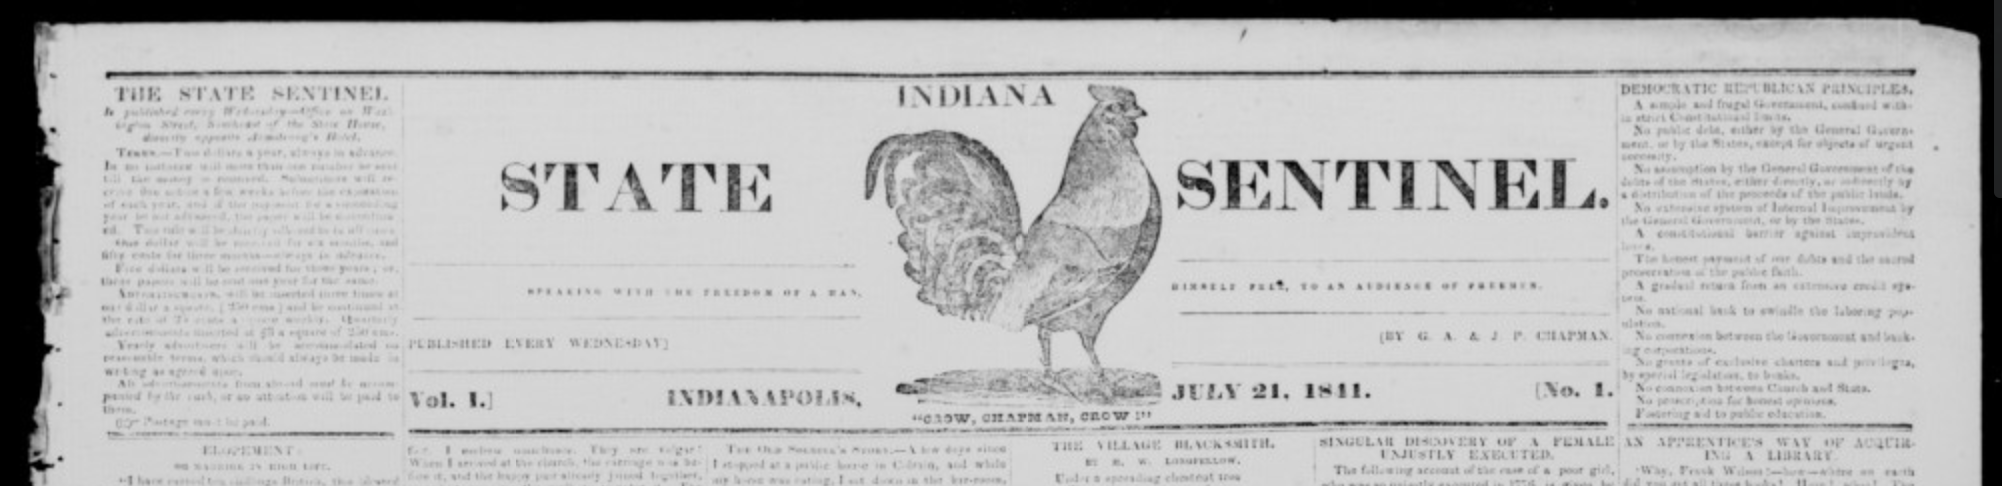 The masthead features a rooster between the words "State" and "Sentinel".